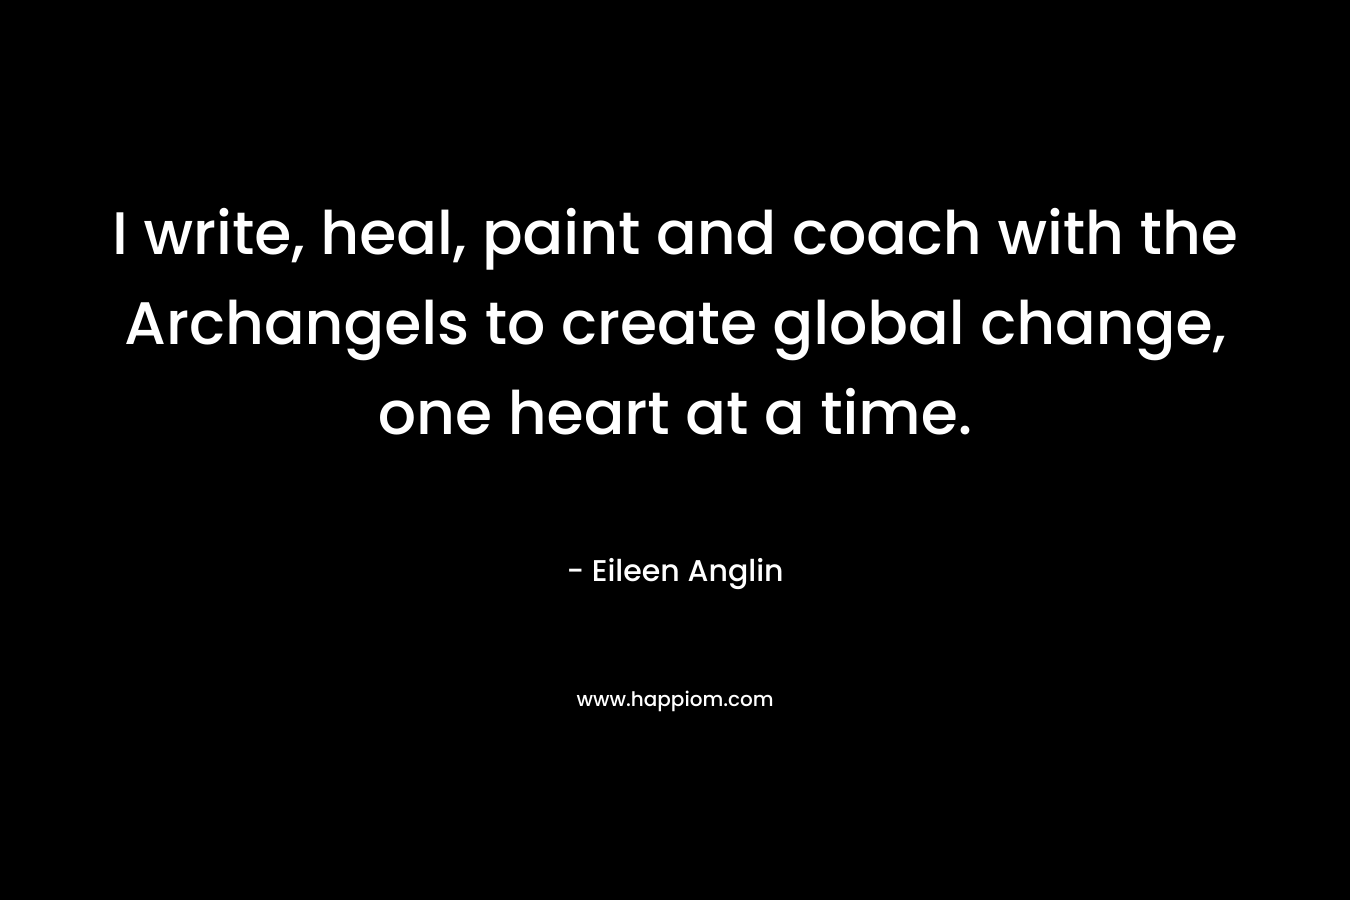 I write, heal, paint and coach with the Archangels to create global change, one heart at a time.